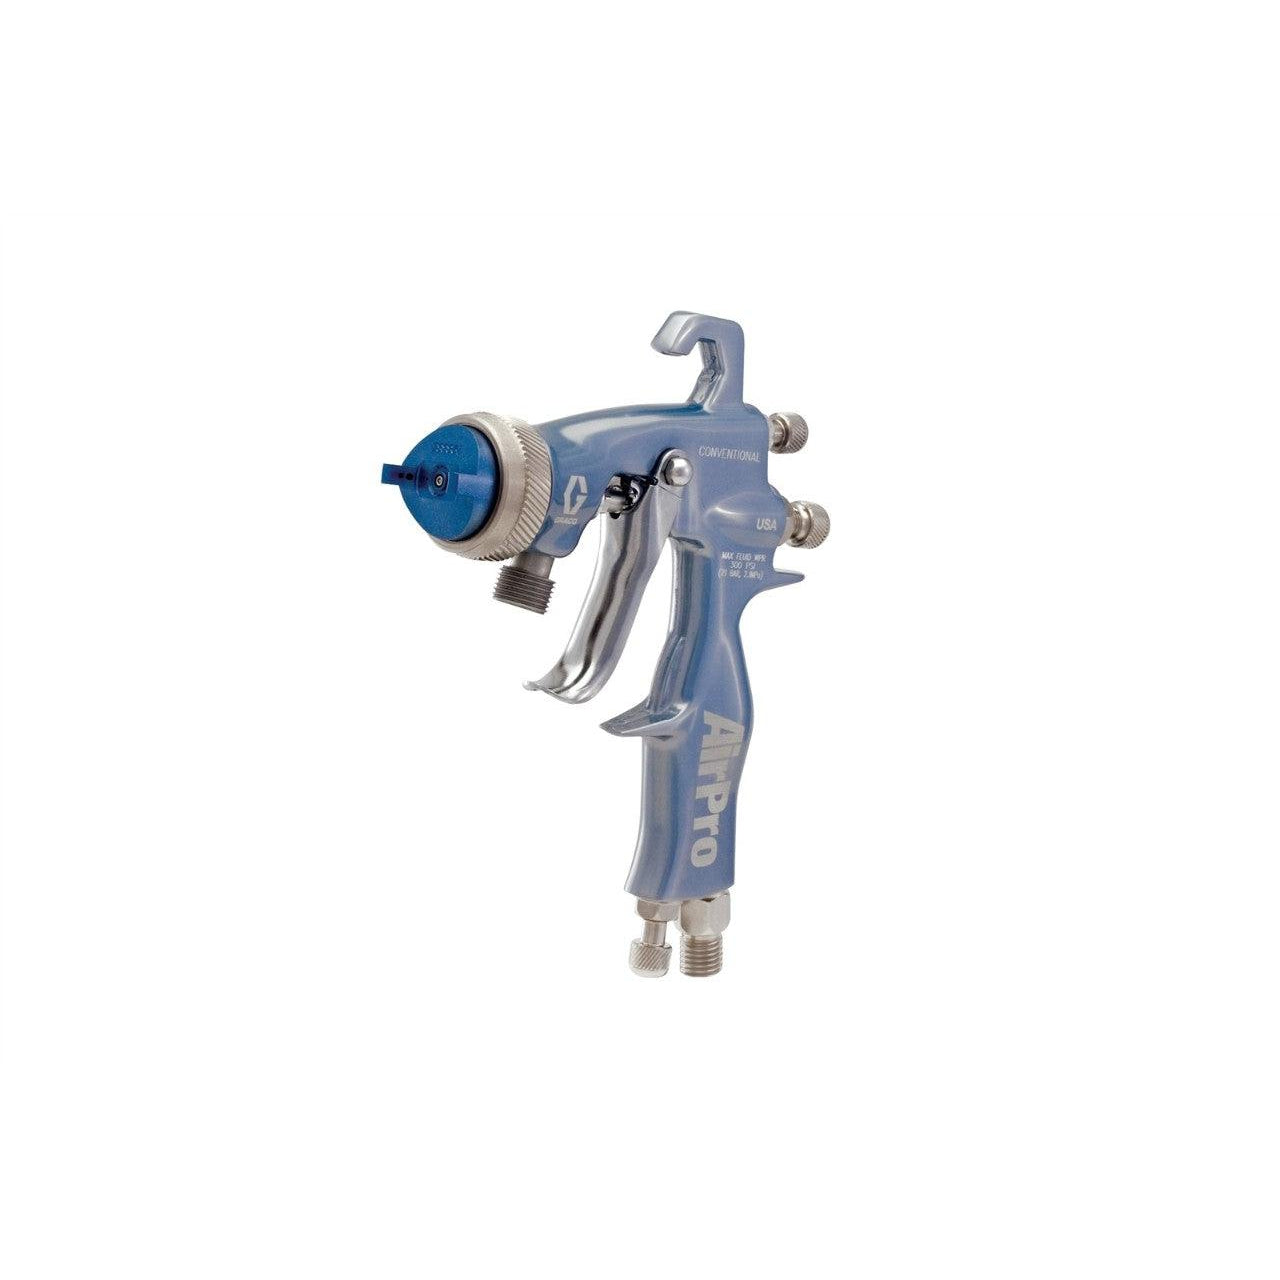 AirPro Air Spray Pressure Feed Gun, Conventional, 0.020 inch (0.5 mm) Nozzle, for Wood Applications